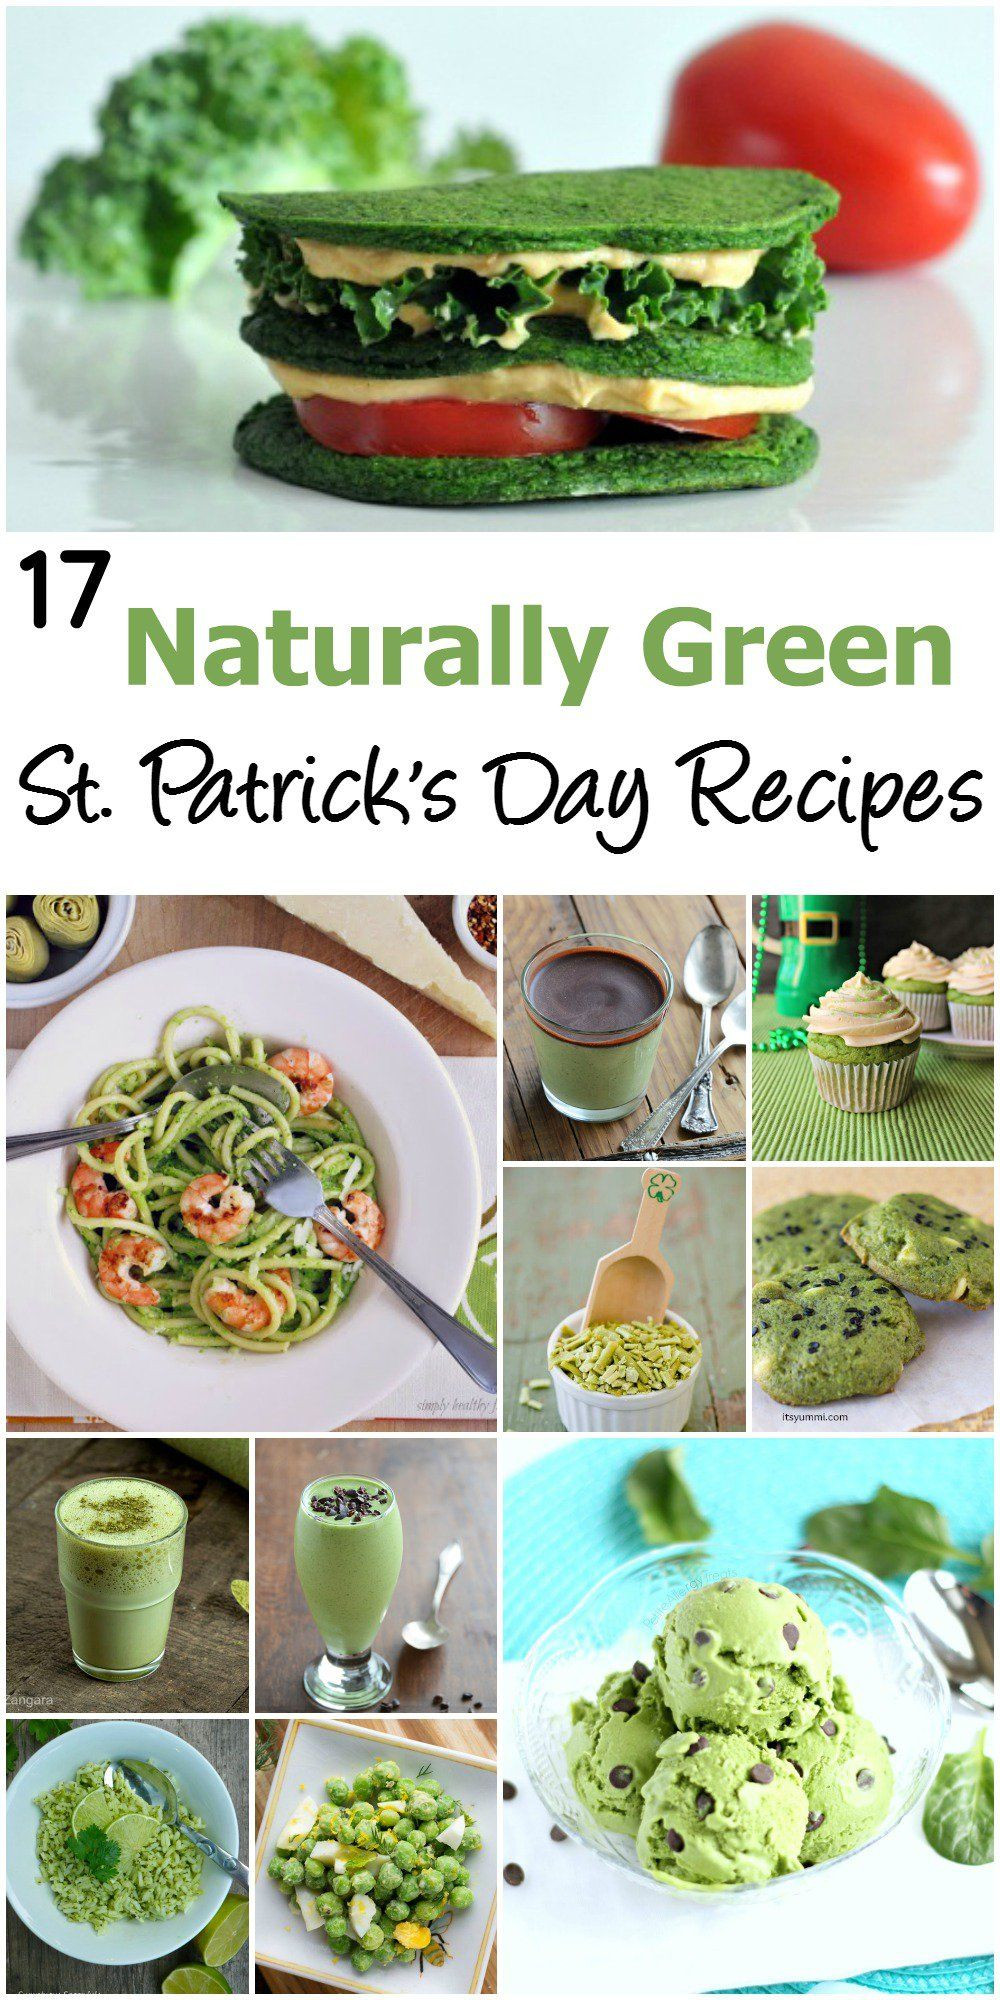 St Patrick's Day Meal Ideas
 Naturally Green Recipes for St Patrick s Day 17 for the